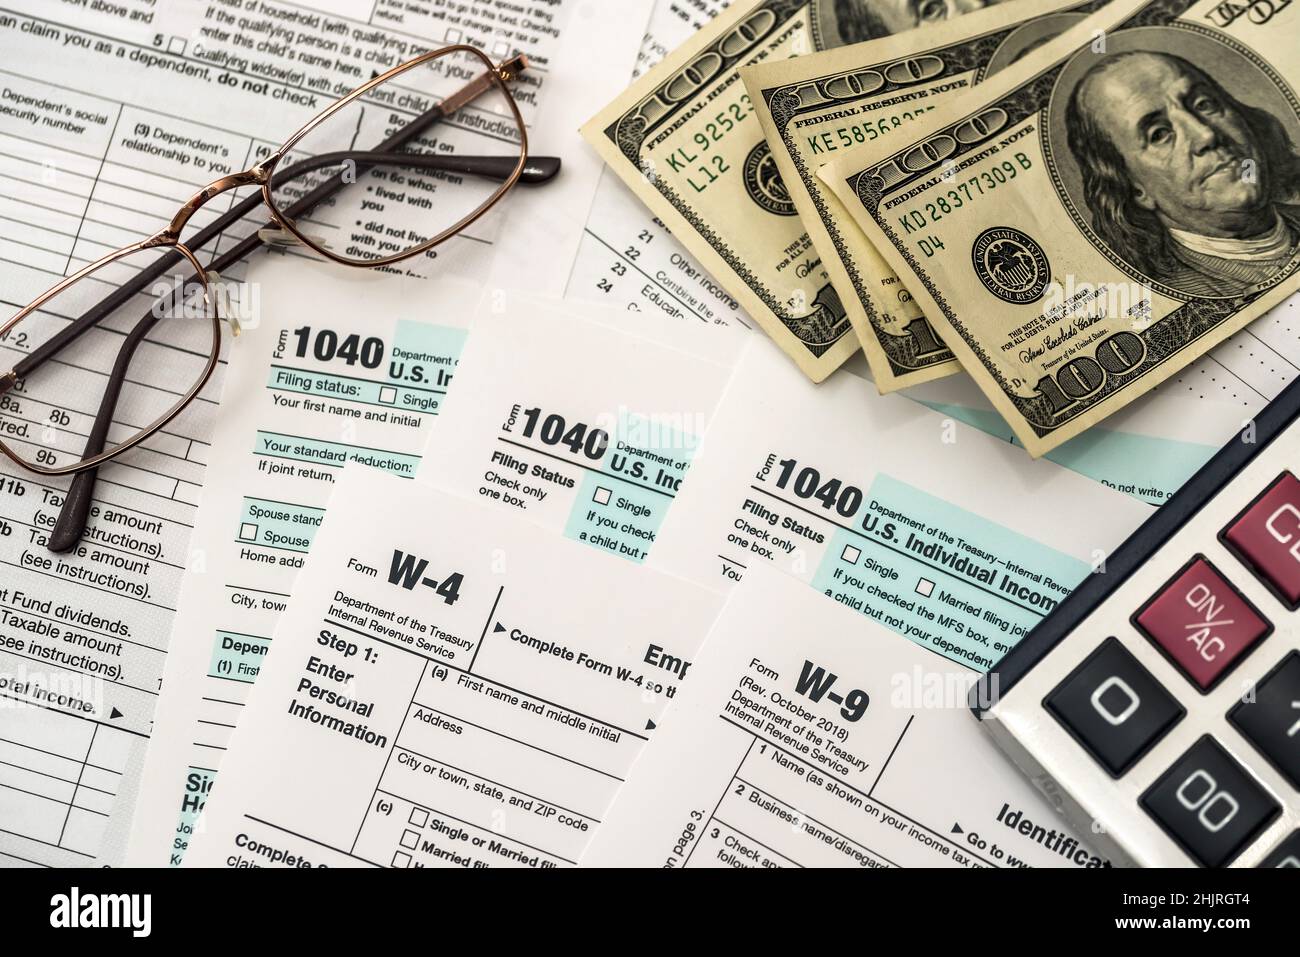 Tax form with dollar, calculator and pen Stock Photo